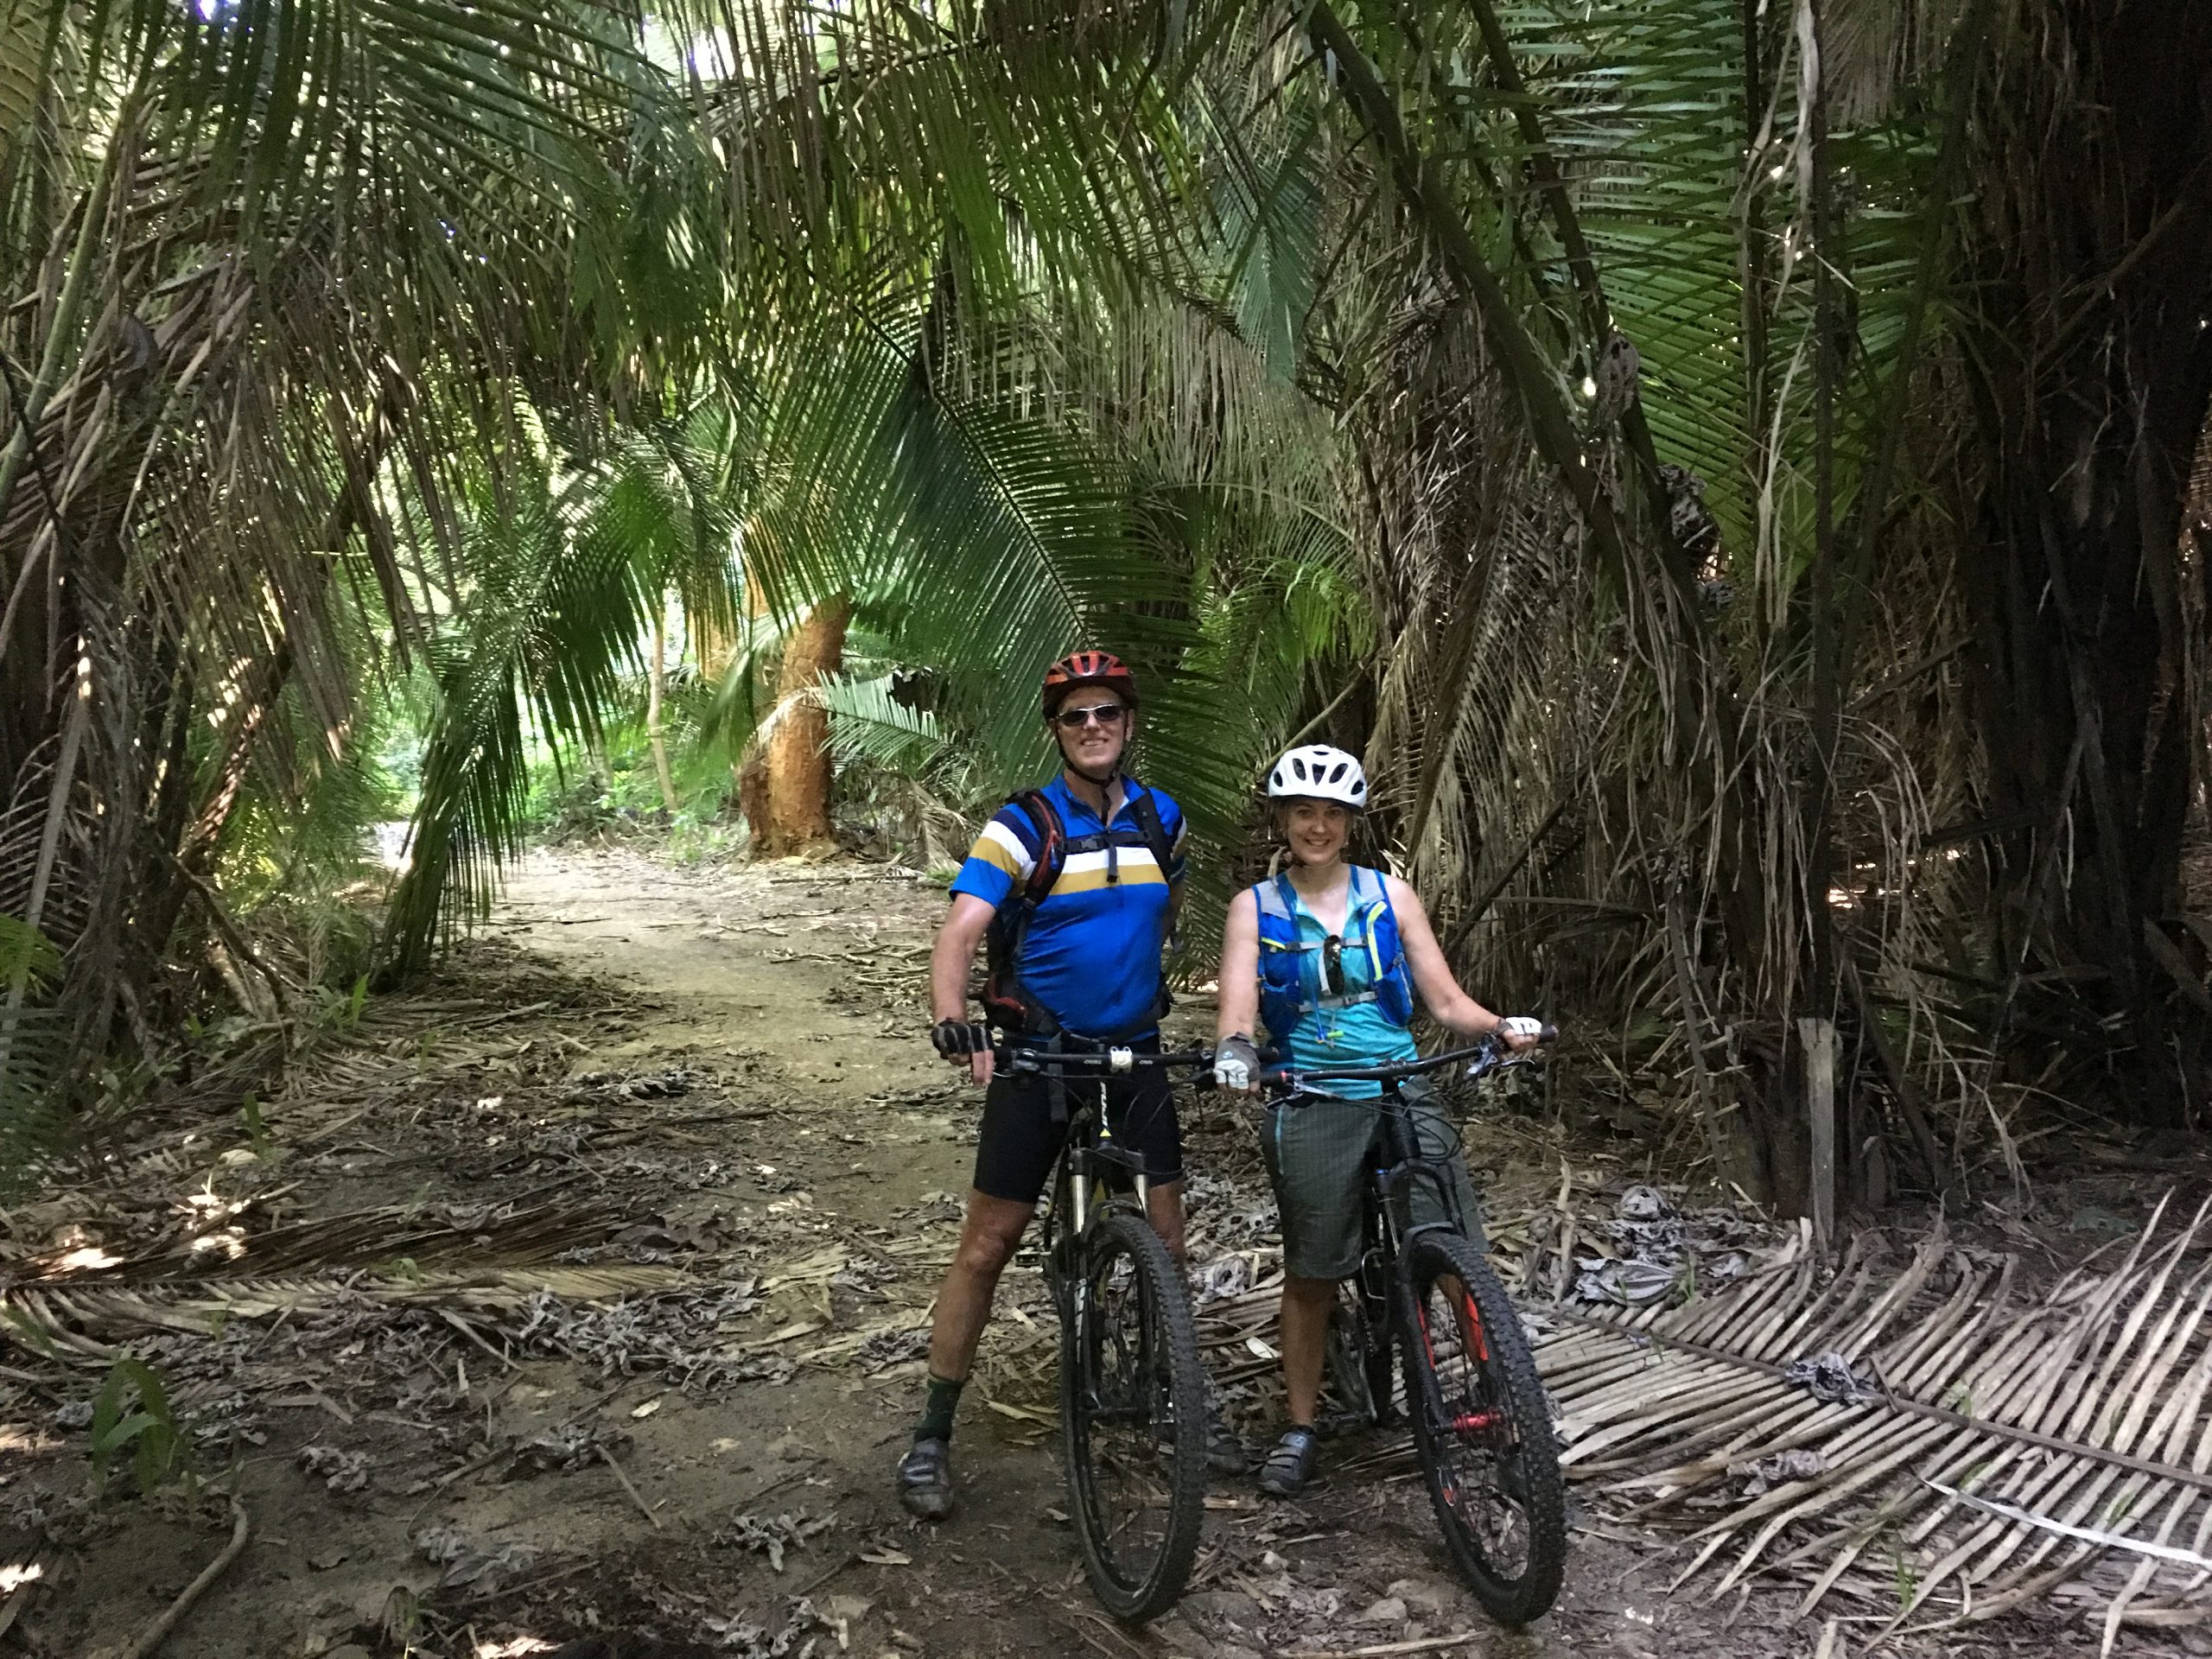 Man and woman standing with mountain bikes in helmets and mountain bike attire on dirt trail surrounded by palm trees.